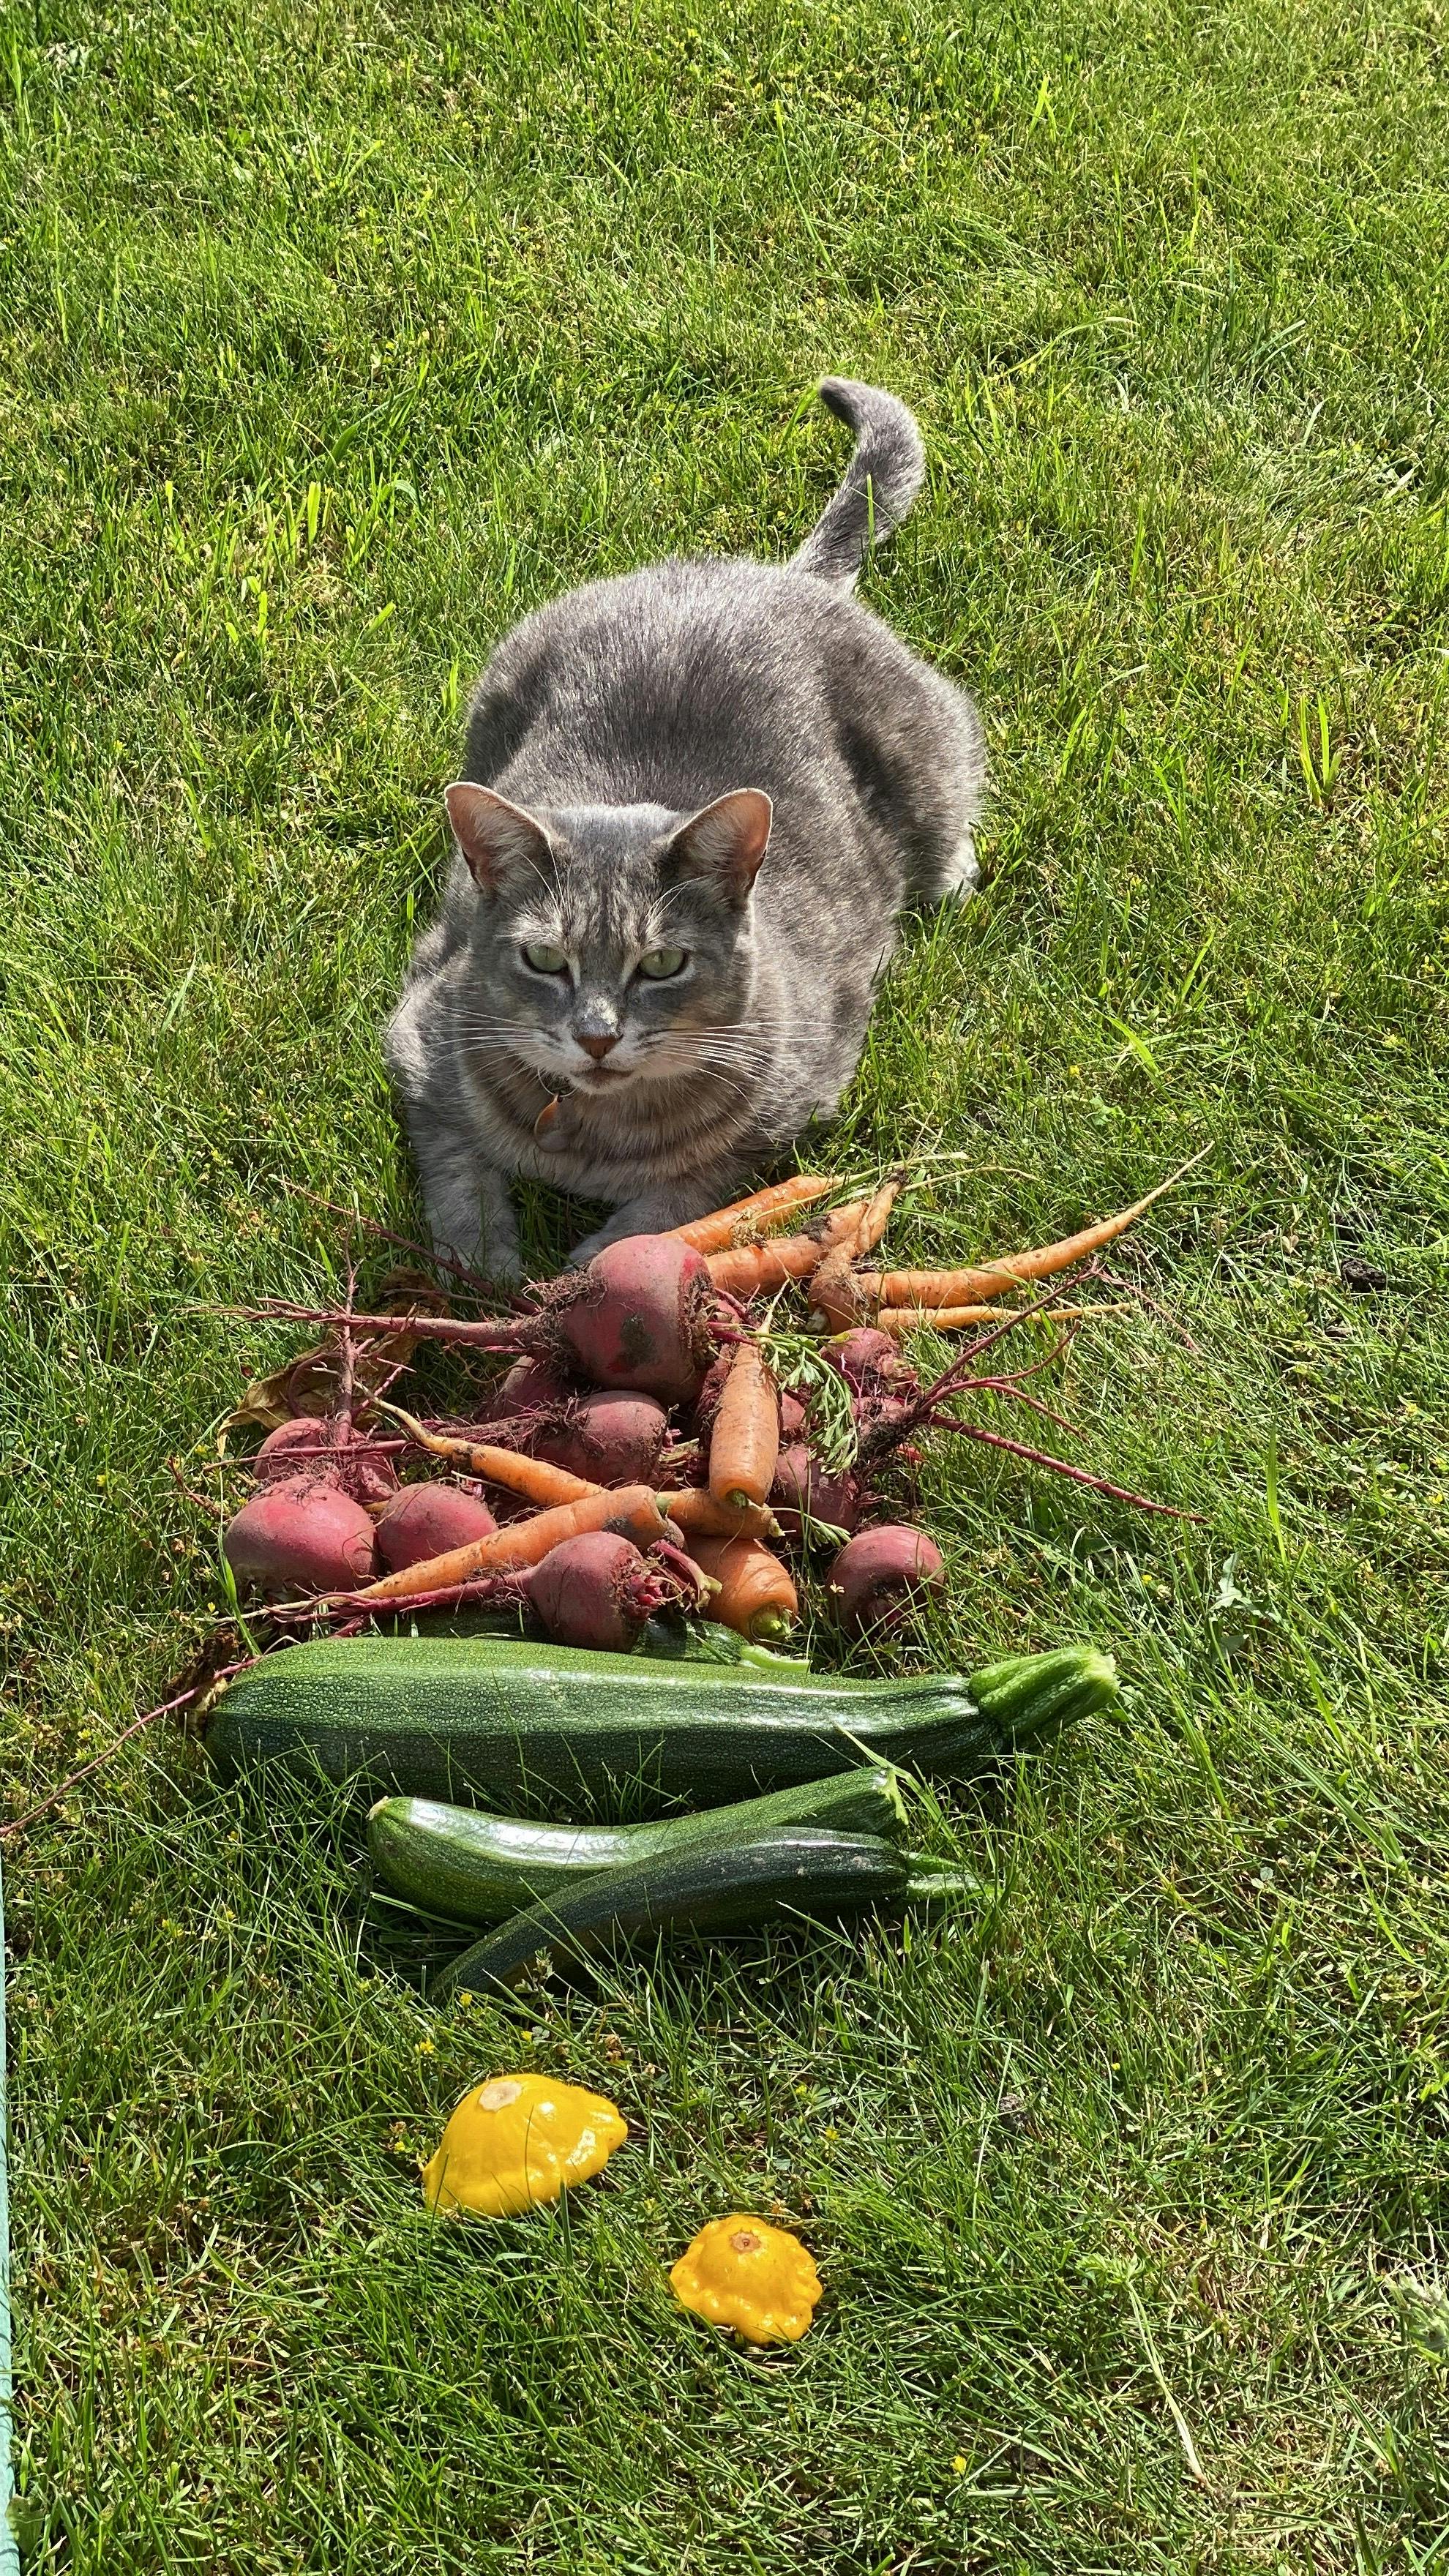 My Cat Harvesting from our Home Garden